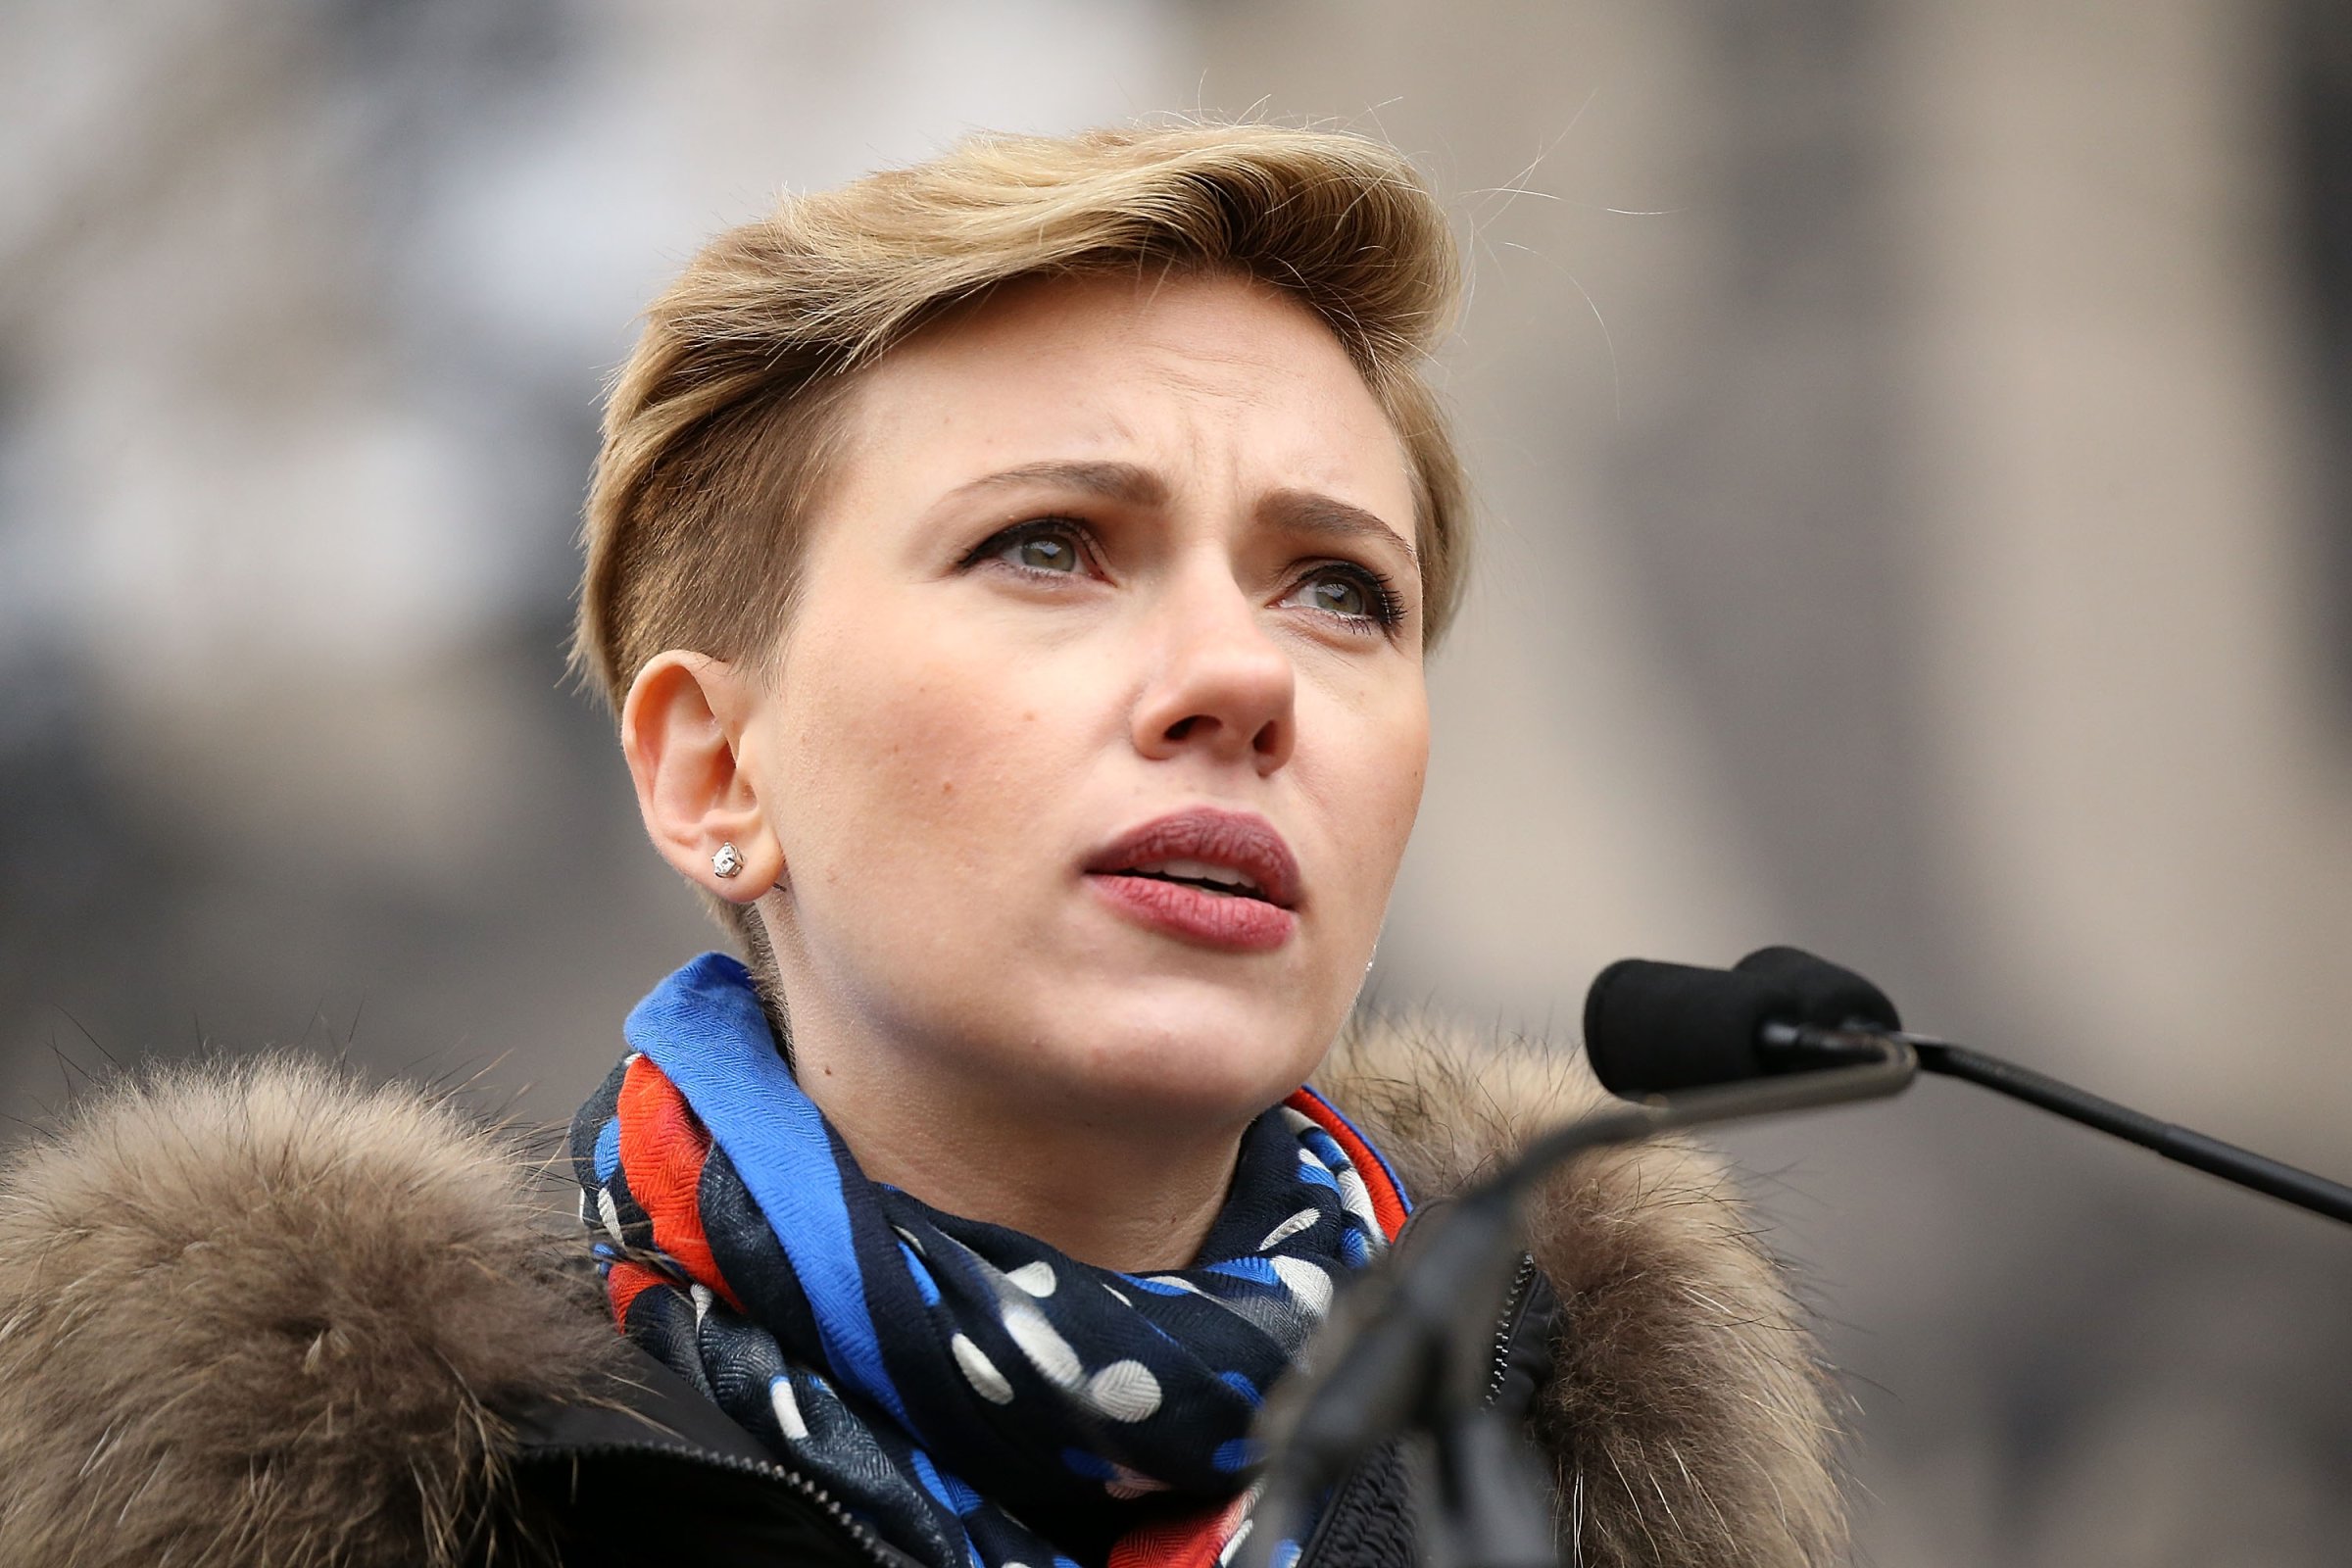 Scarlett Johansson speaks onstage during the rally at the Women's March on Washington on January 21, 2017 in Washington, DC.